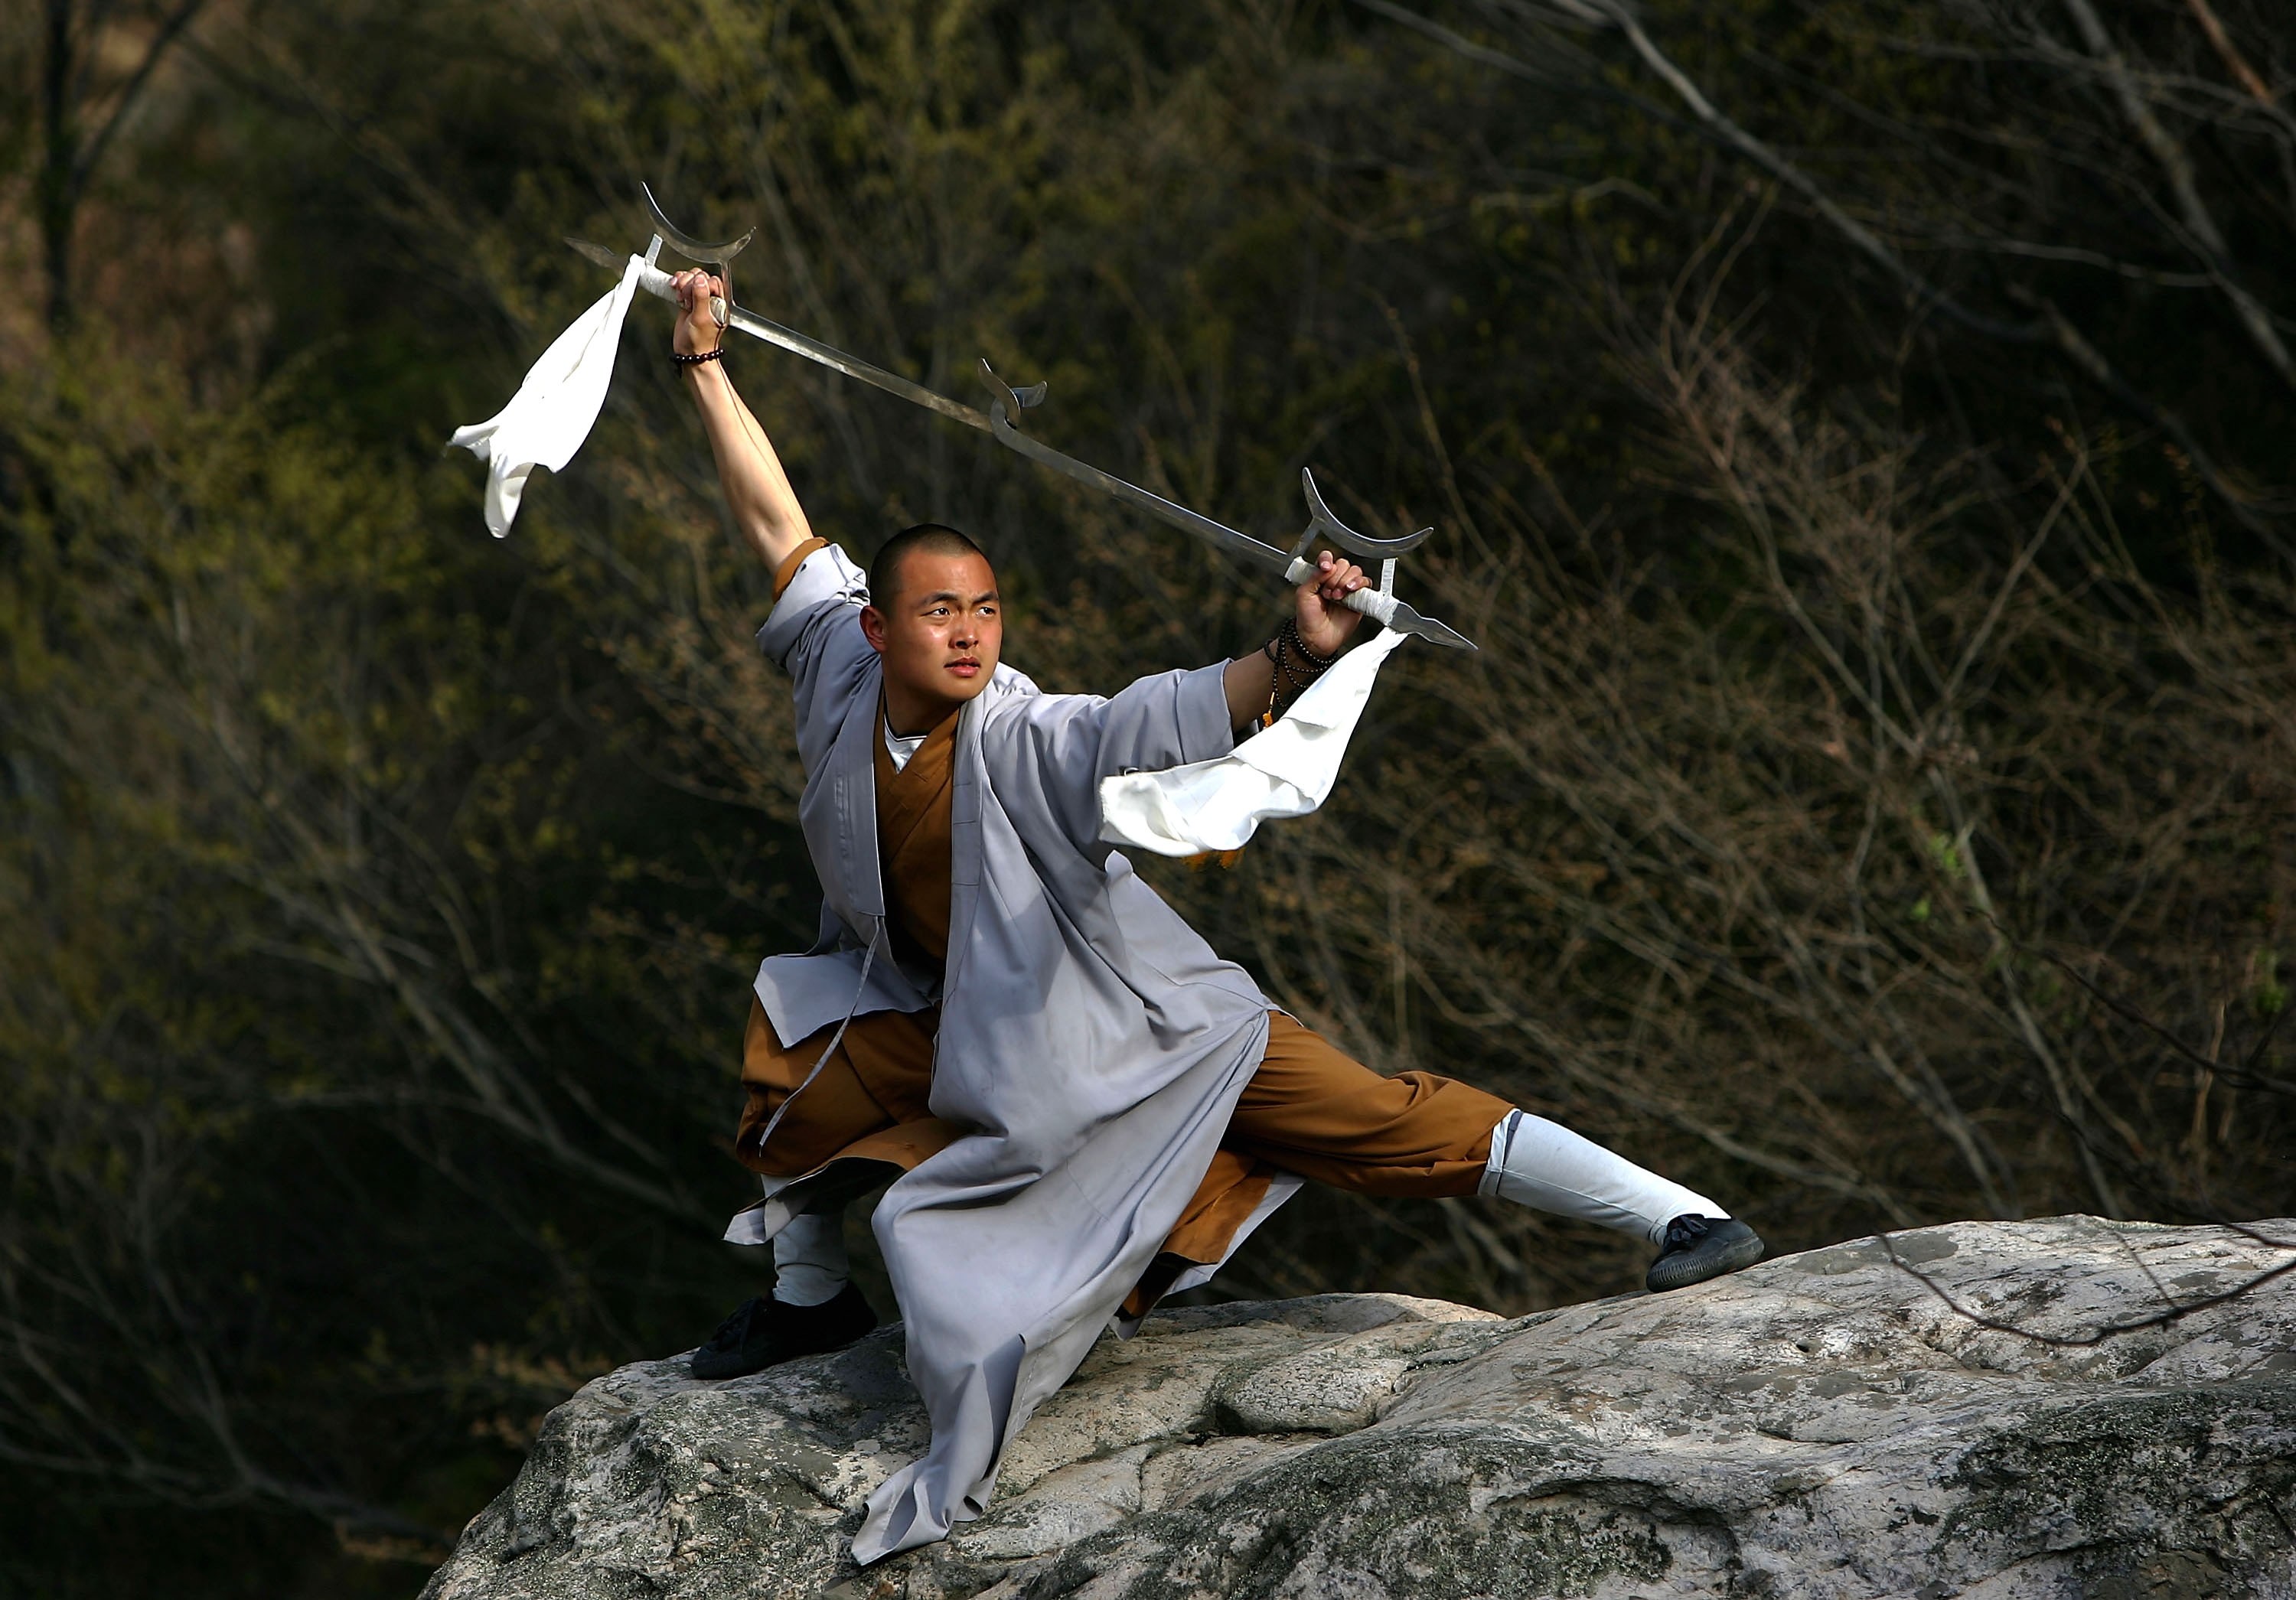 Shaolin Temple Martial Art Acts Videos And Wallpaper